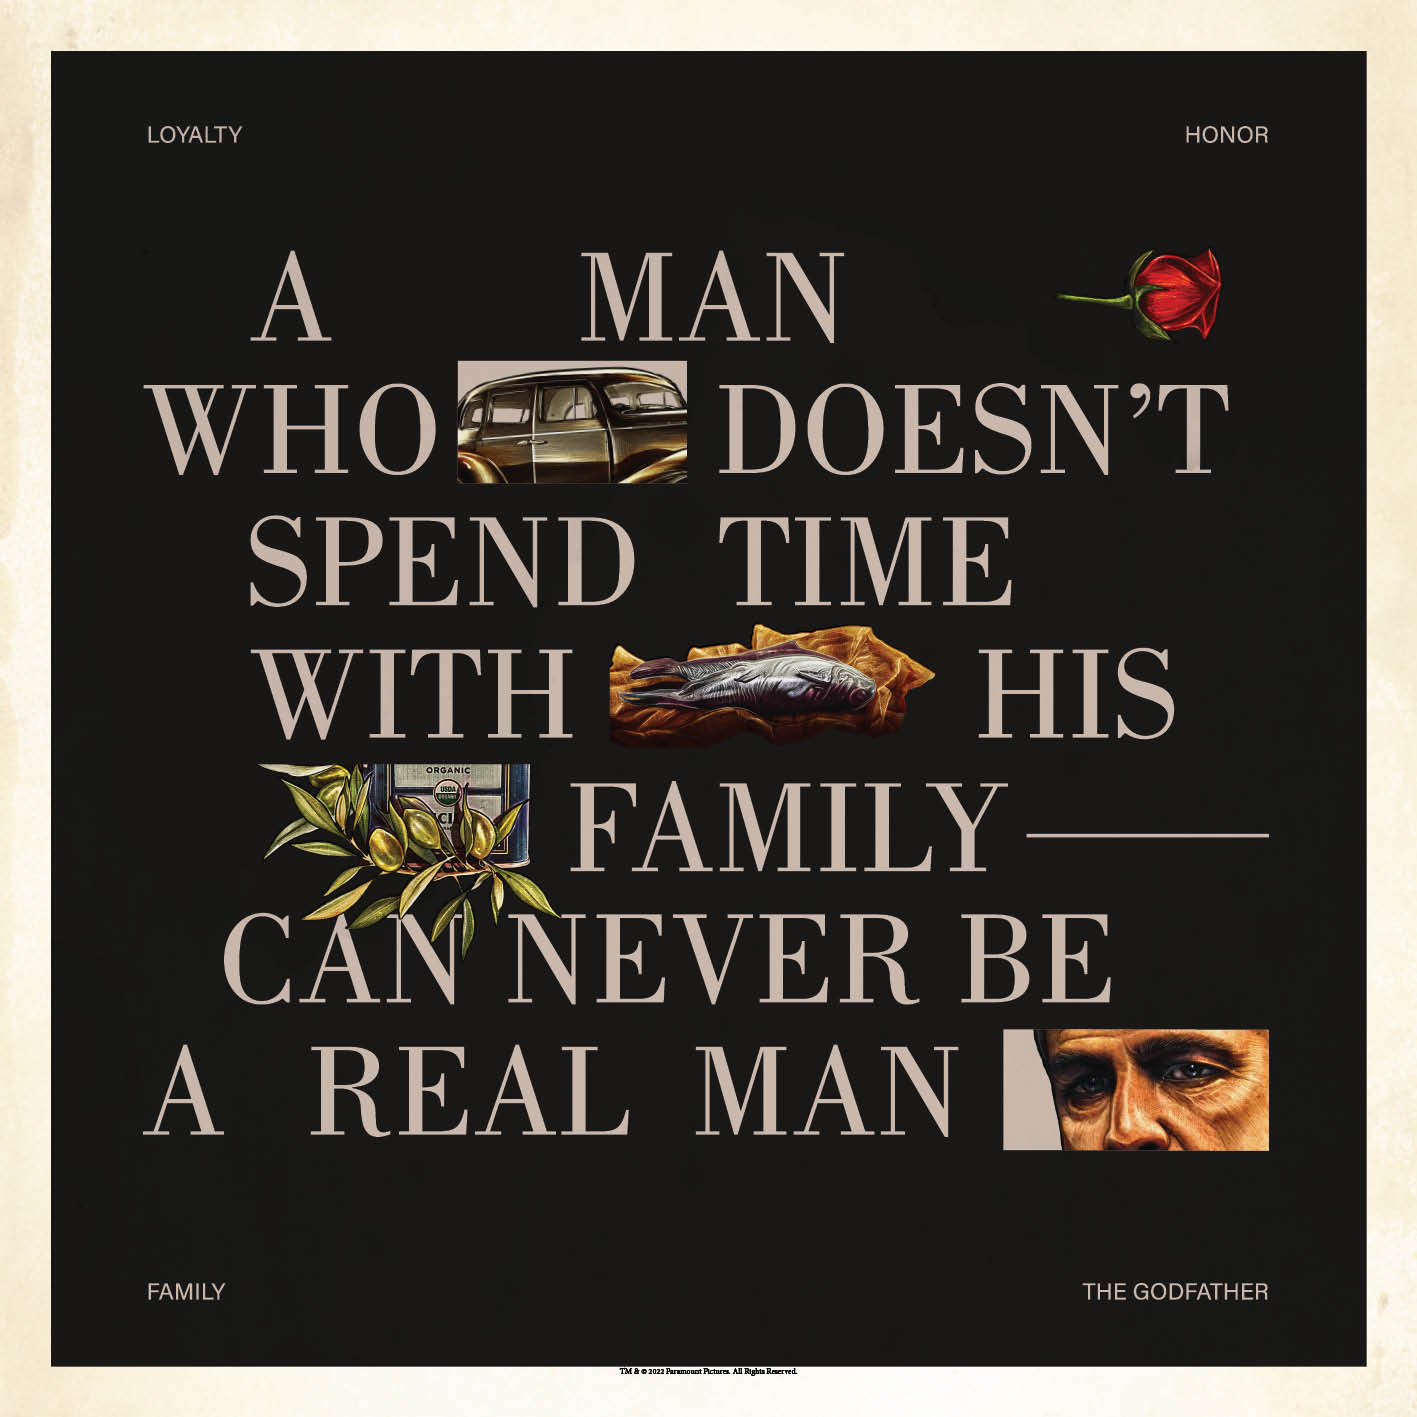 The Godfather - Real Man Poster